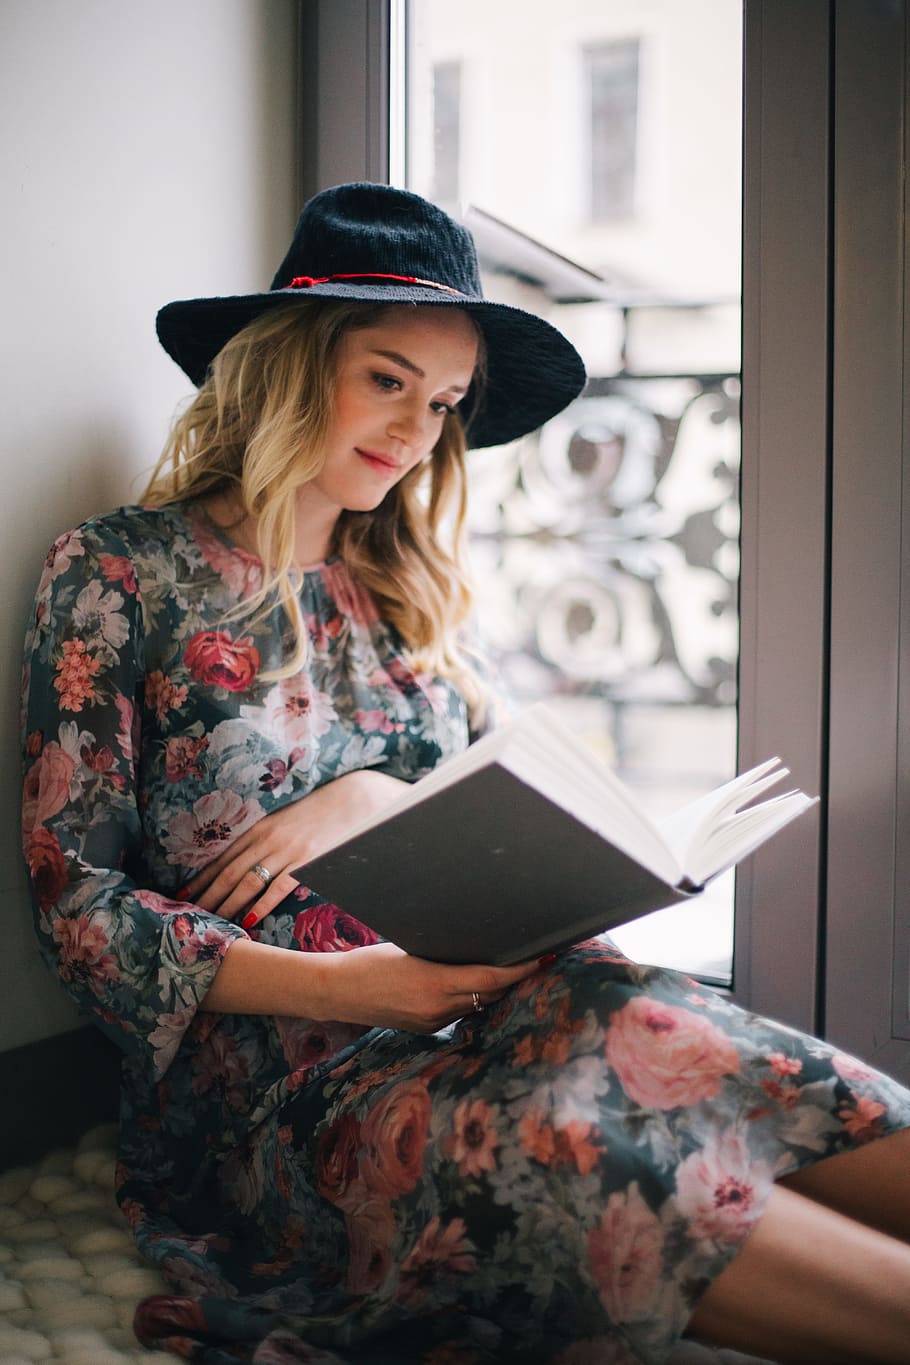 Pregnant Woman Wearing Green, Red, and White Floral Dress Reading a Book Near Window, HD wallpaper